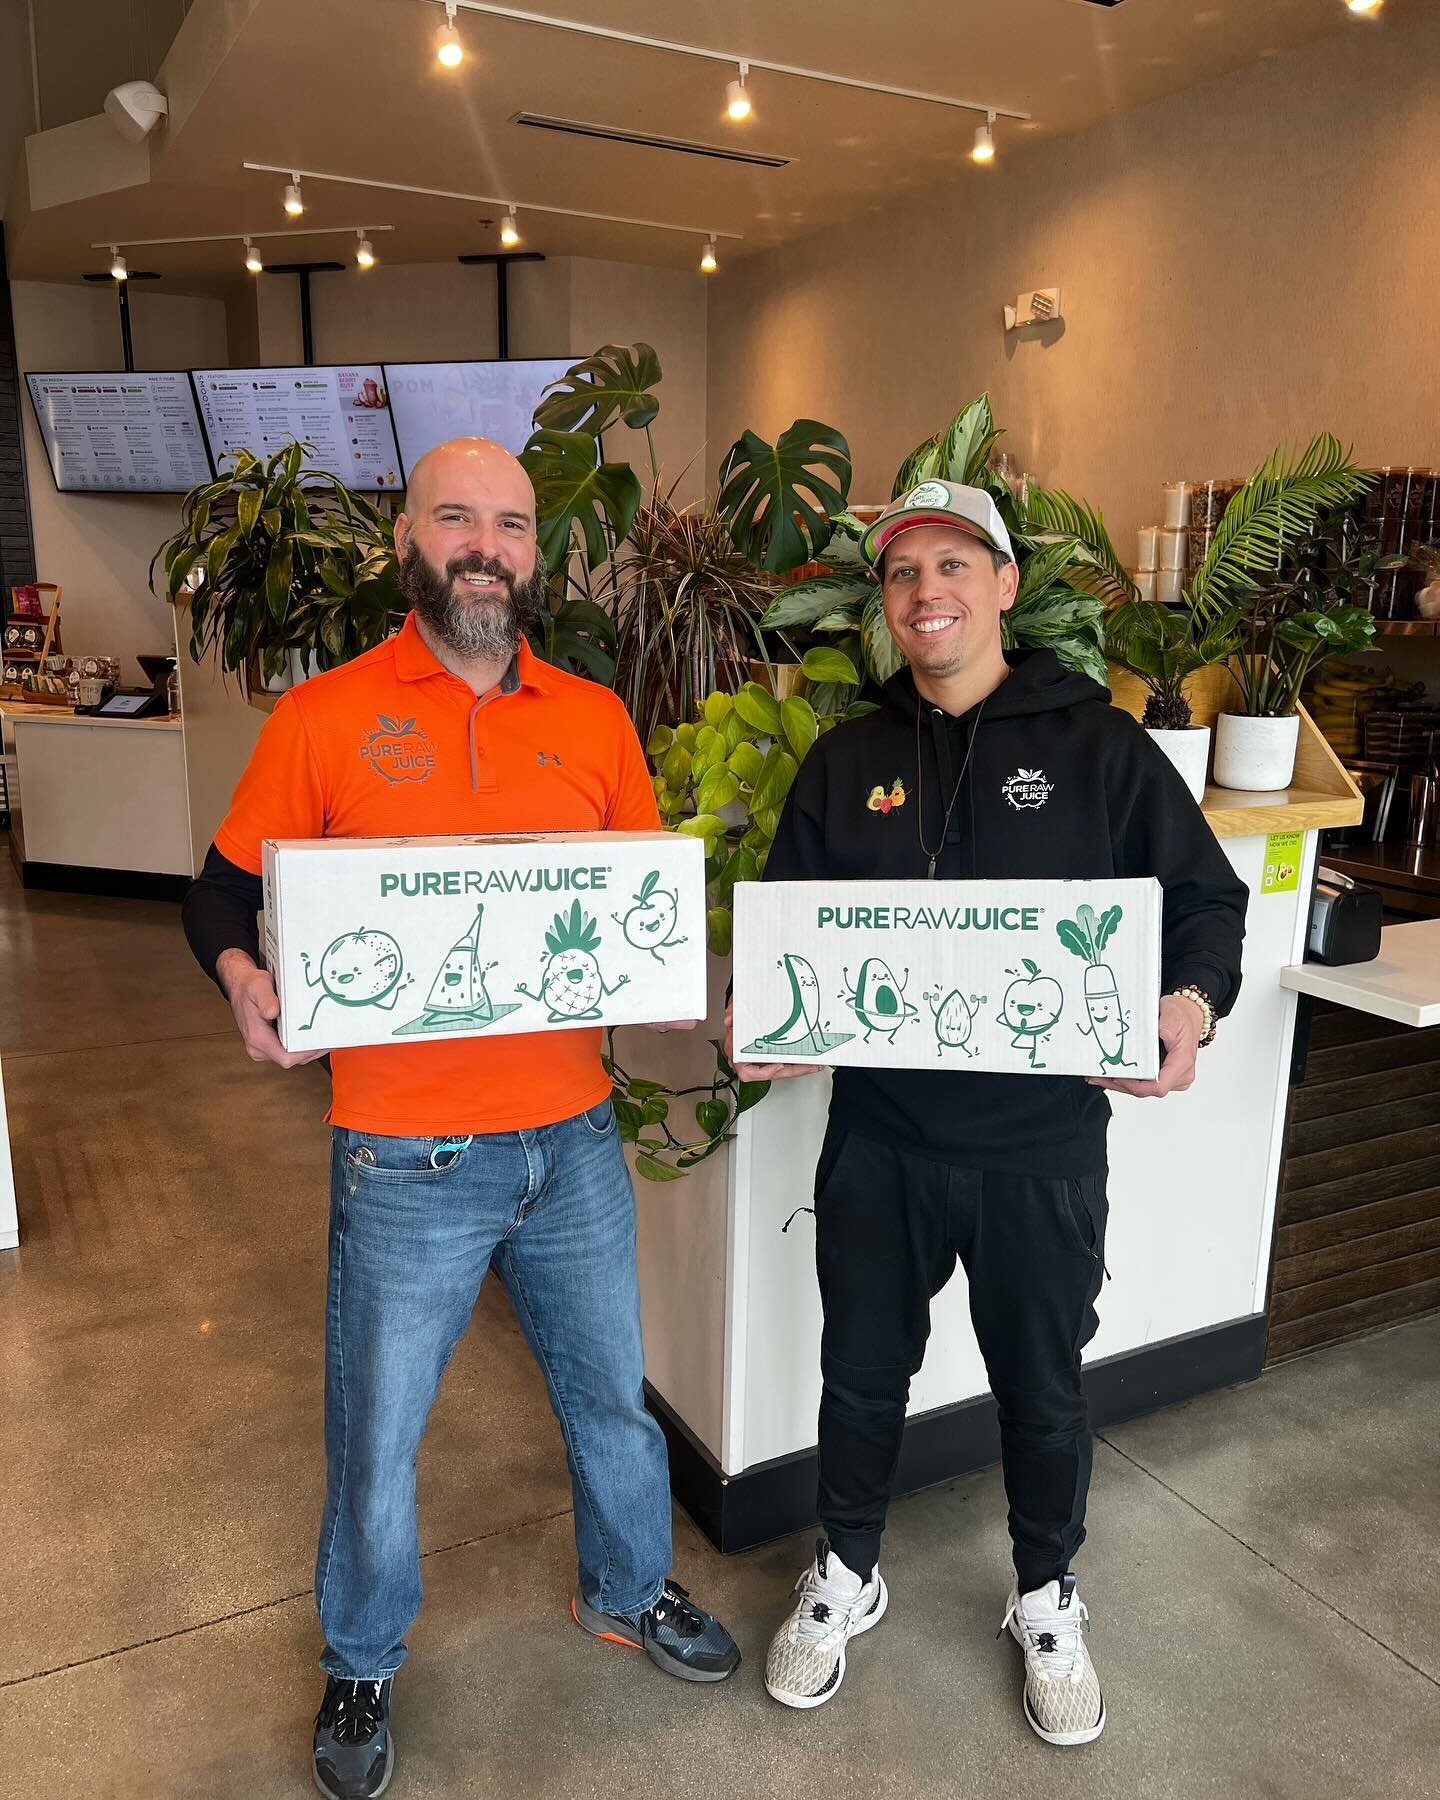 Want a buddy to join you for a 3-day juice cleanse? 🤩 

Sip it up with Adam and Chuck! They&rsquo;re stoked to be doing the cleanse together and would love for you to join them! 🙌🙌🙌

Send this to your Fam and encourage them to grab a cleanse alon